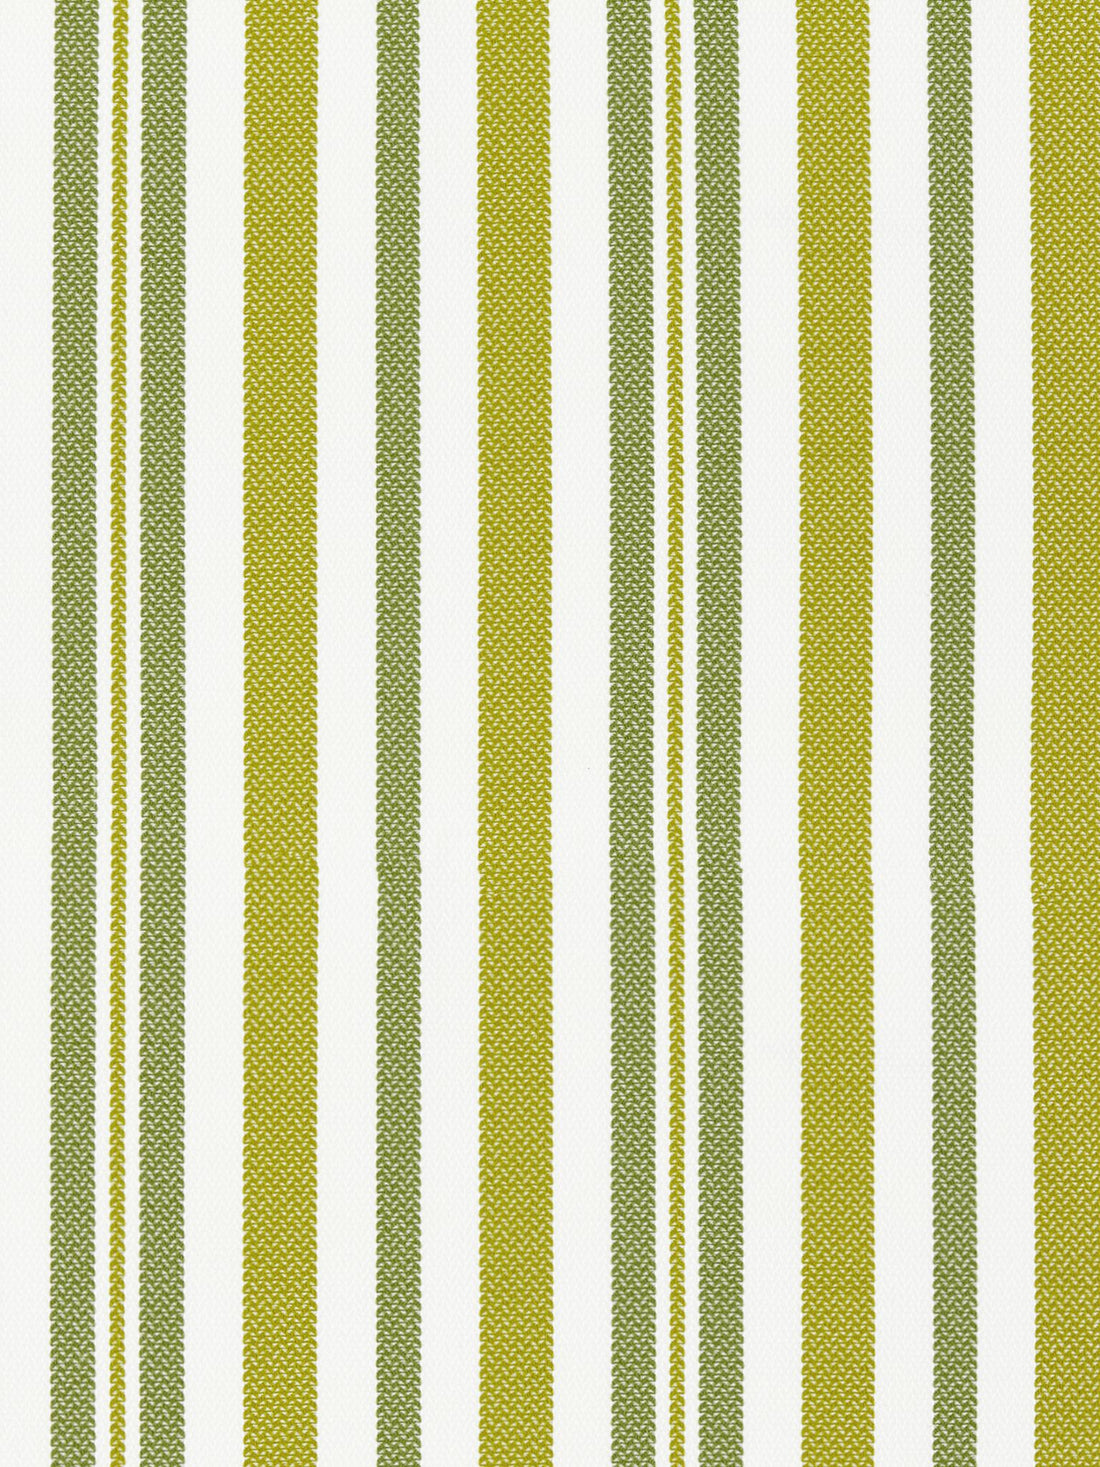 Santorini Stripe fabric in palm color - pattern number SC 000227188 - by Scalamandre in the Scalamandre Fabrics Book 1 collection